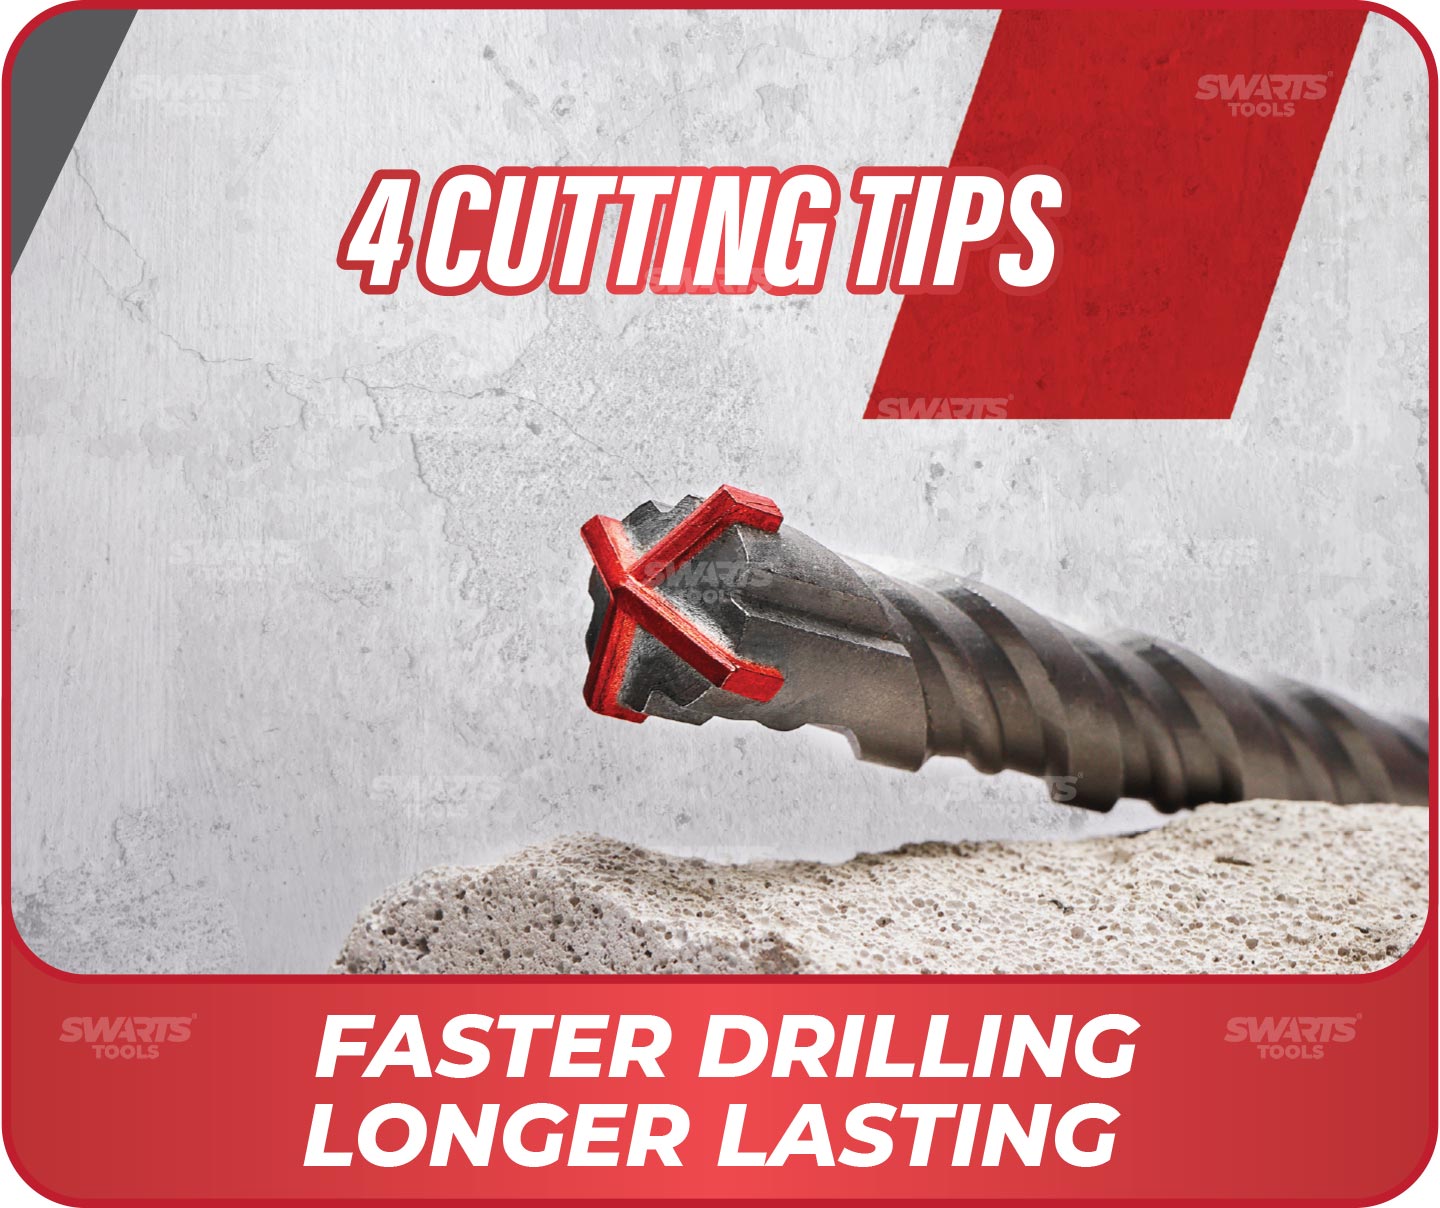 4 CUTTING TIPS, FASTER DRILLING LONGER LASTING